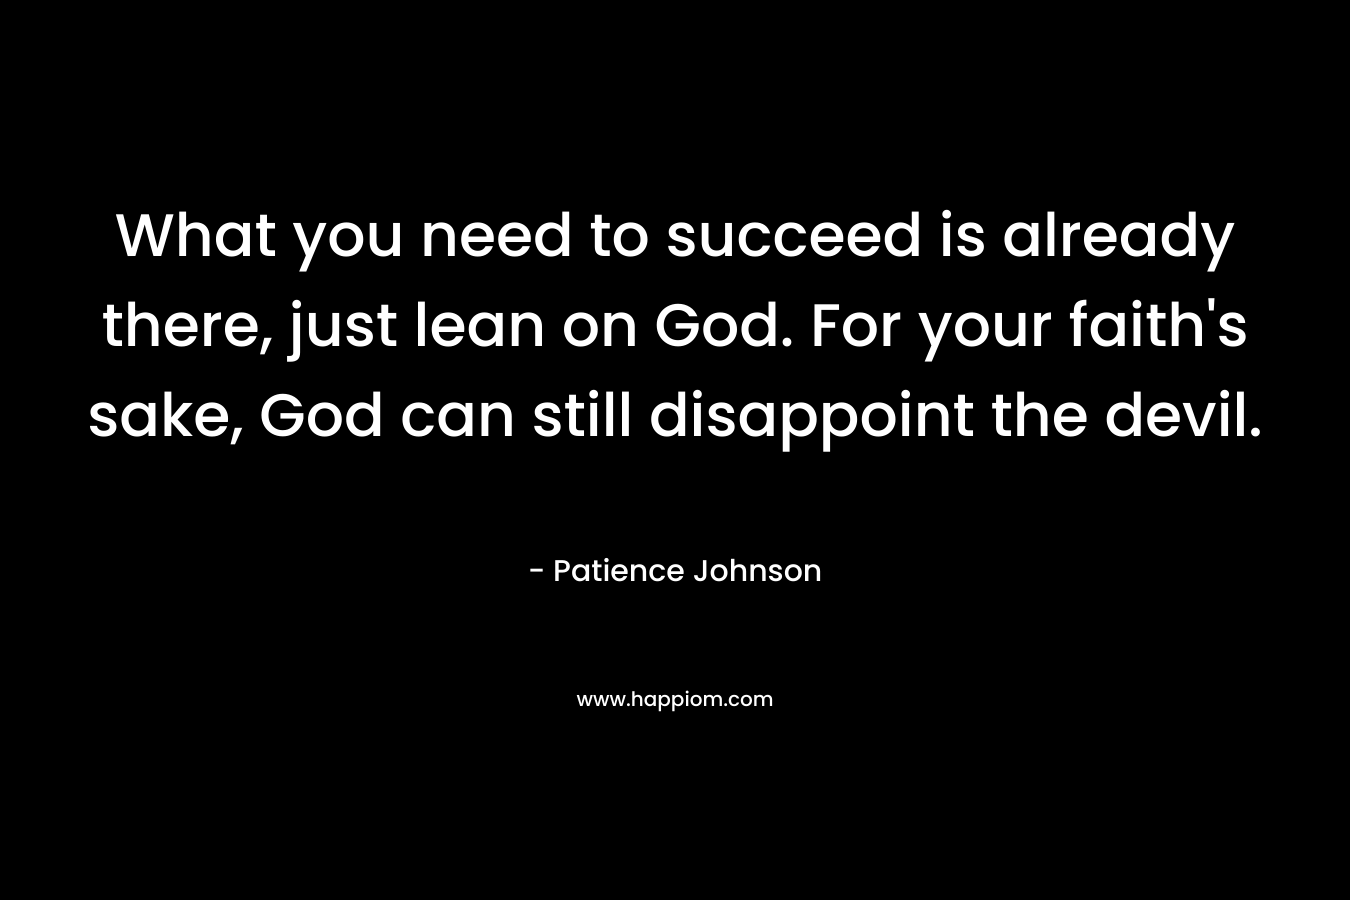 What you need to succeed is already there, just lean on God. For your faith's sake, God can still disappoint the devil.